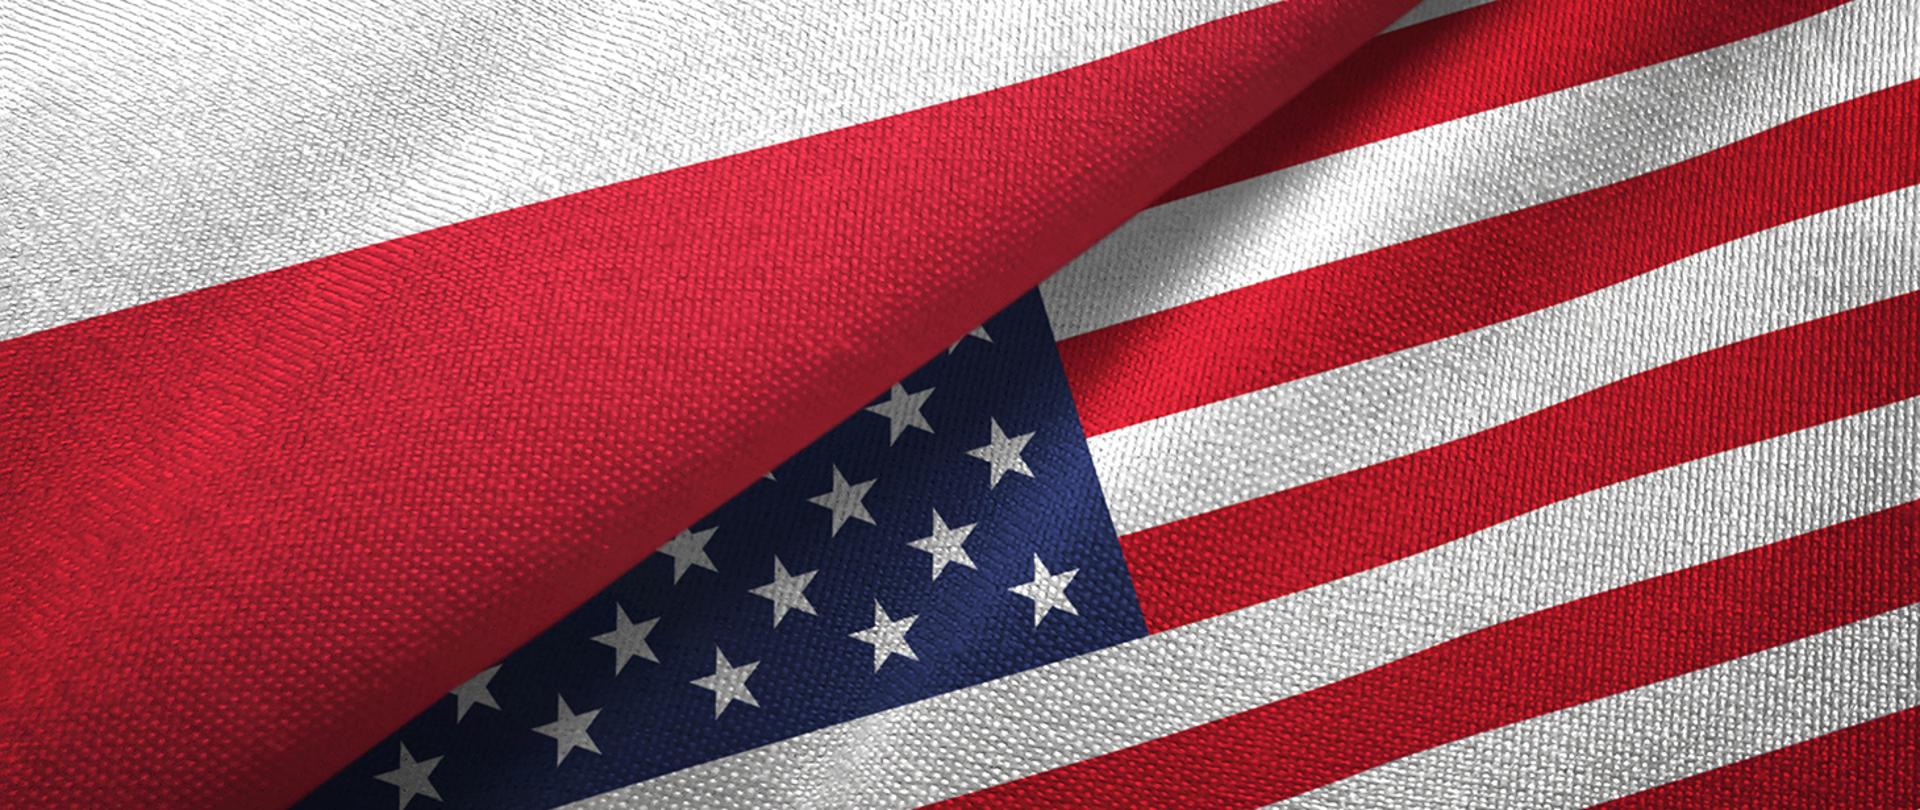 Poland and United States flags together textile cloth, fabric texture